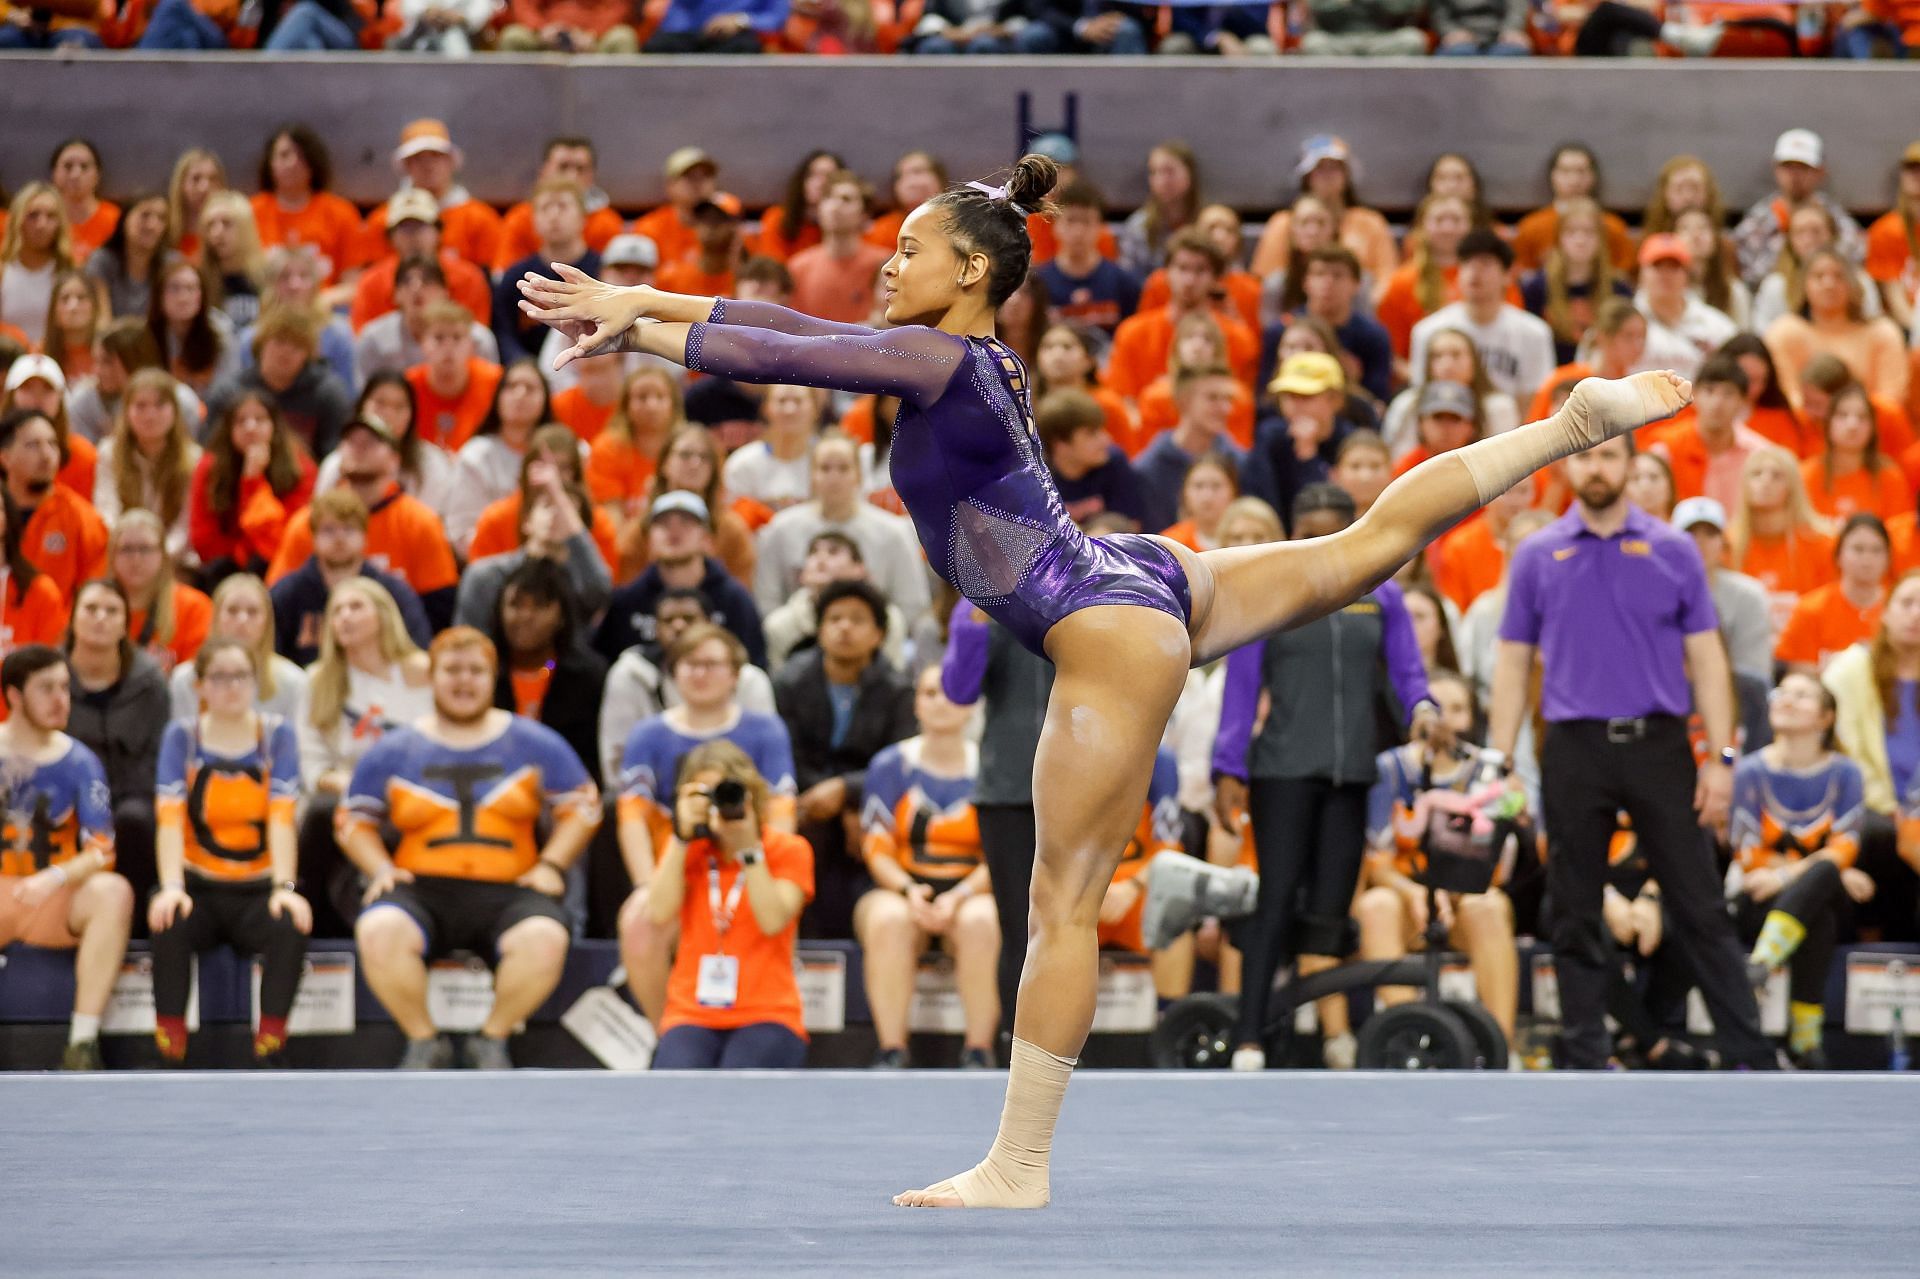 Haleigh Bryant of LSU competes on the floor during a gymnastics meet against Auburn at Neville Arena on February 10, 2023 in Auburn, Alabama. (Photo by Stew Milne/Getty Images)